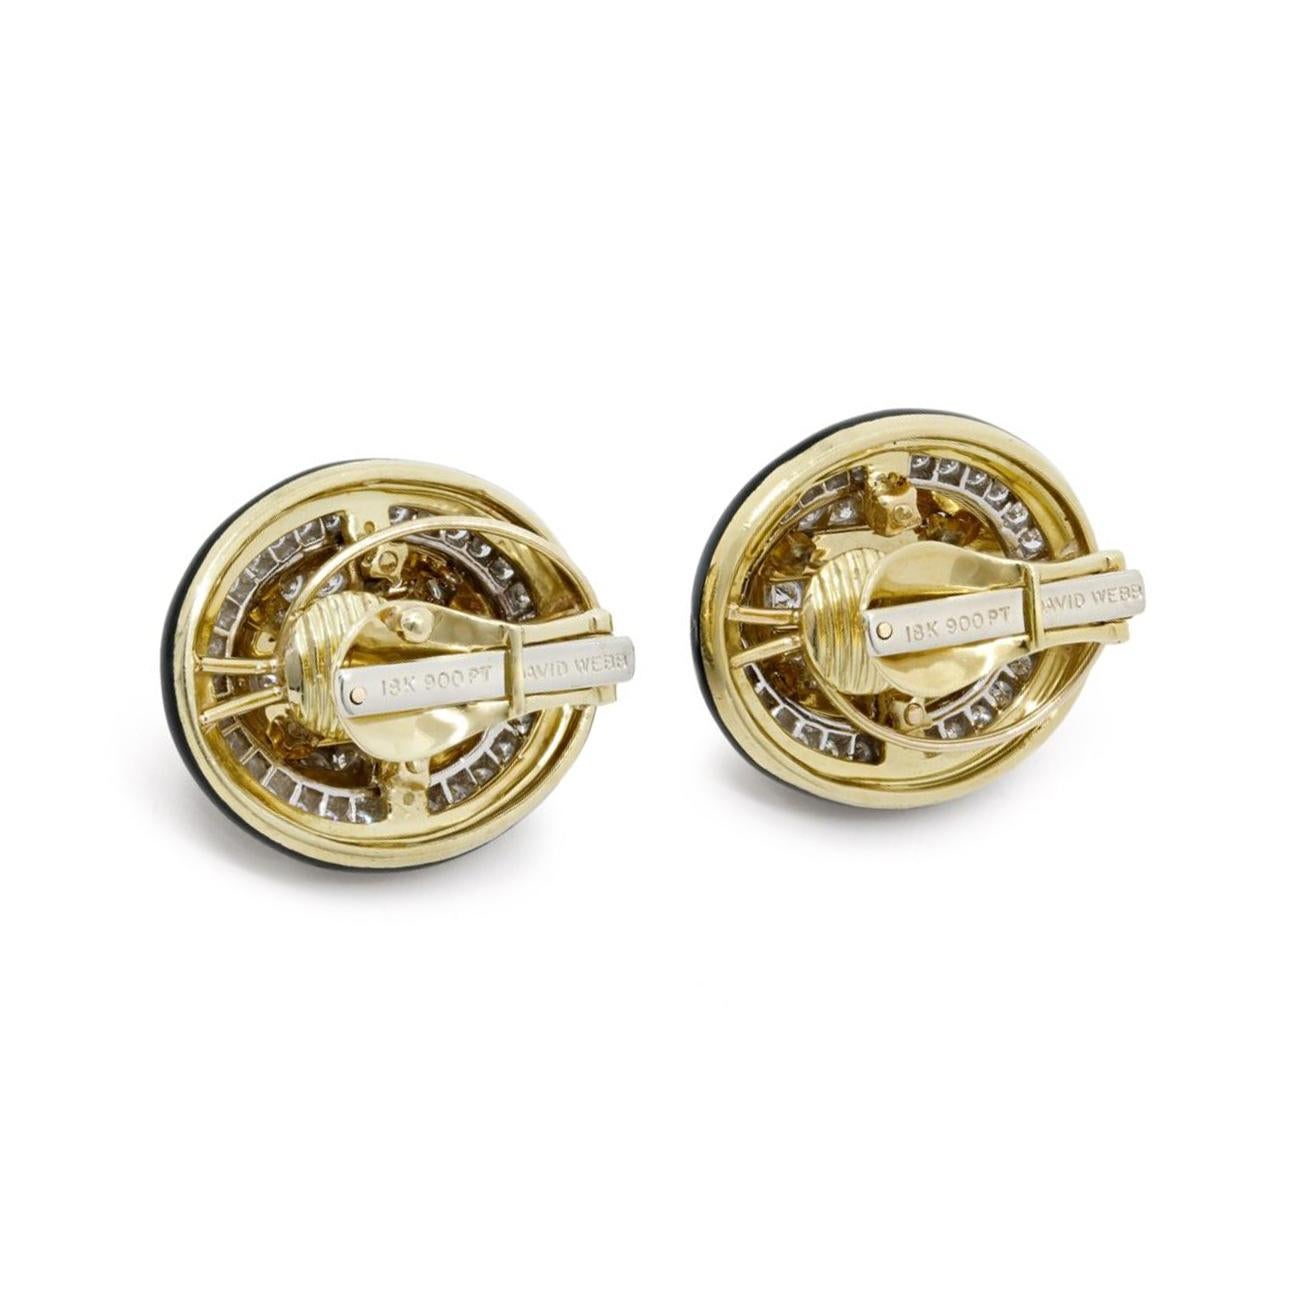 Platinum, 18K Yellow gold black enamel earrings with diamonds by David Webb. Oval 2 Tiered Domes with Black Enamel Borders and Center Portions.

Platinum and 18K yellow gold
4.06 ctw F-G/VS1-SI1 round brilliant diamonds